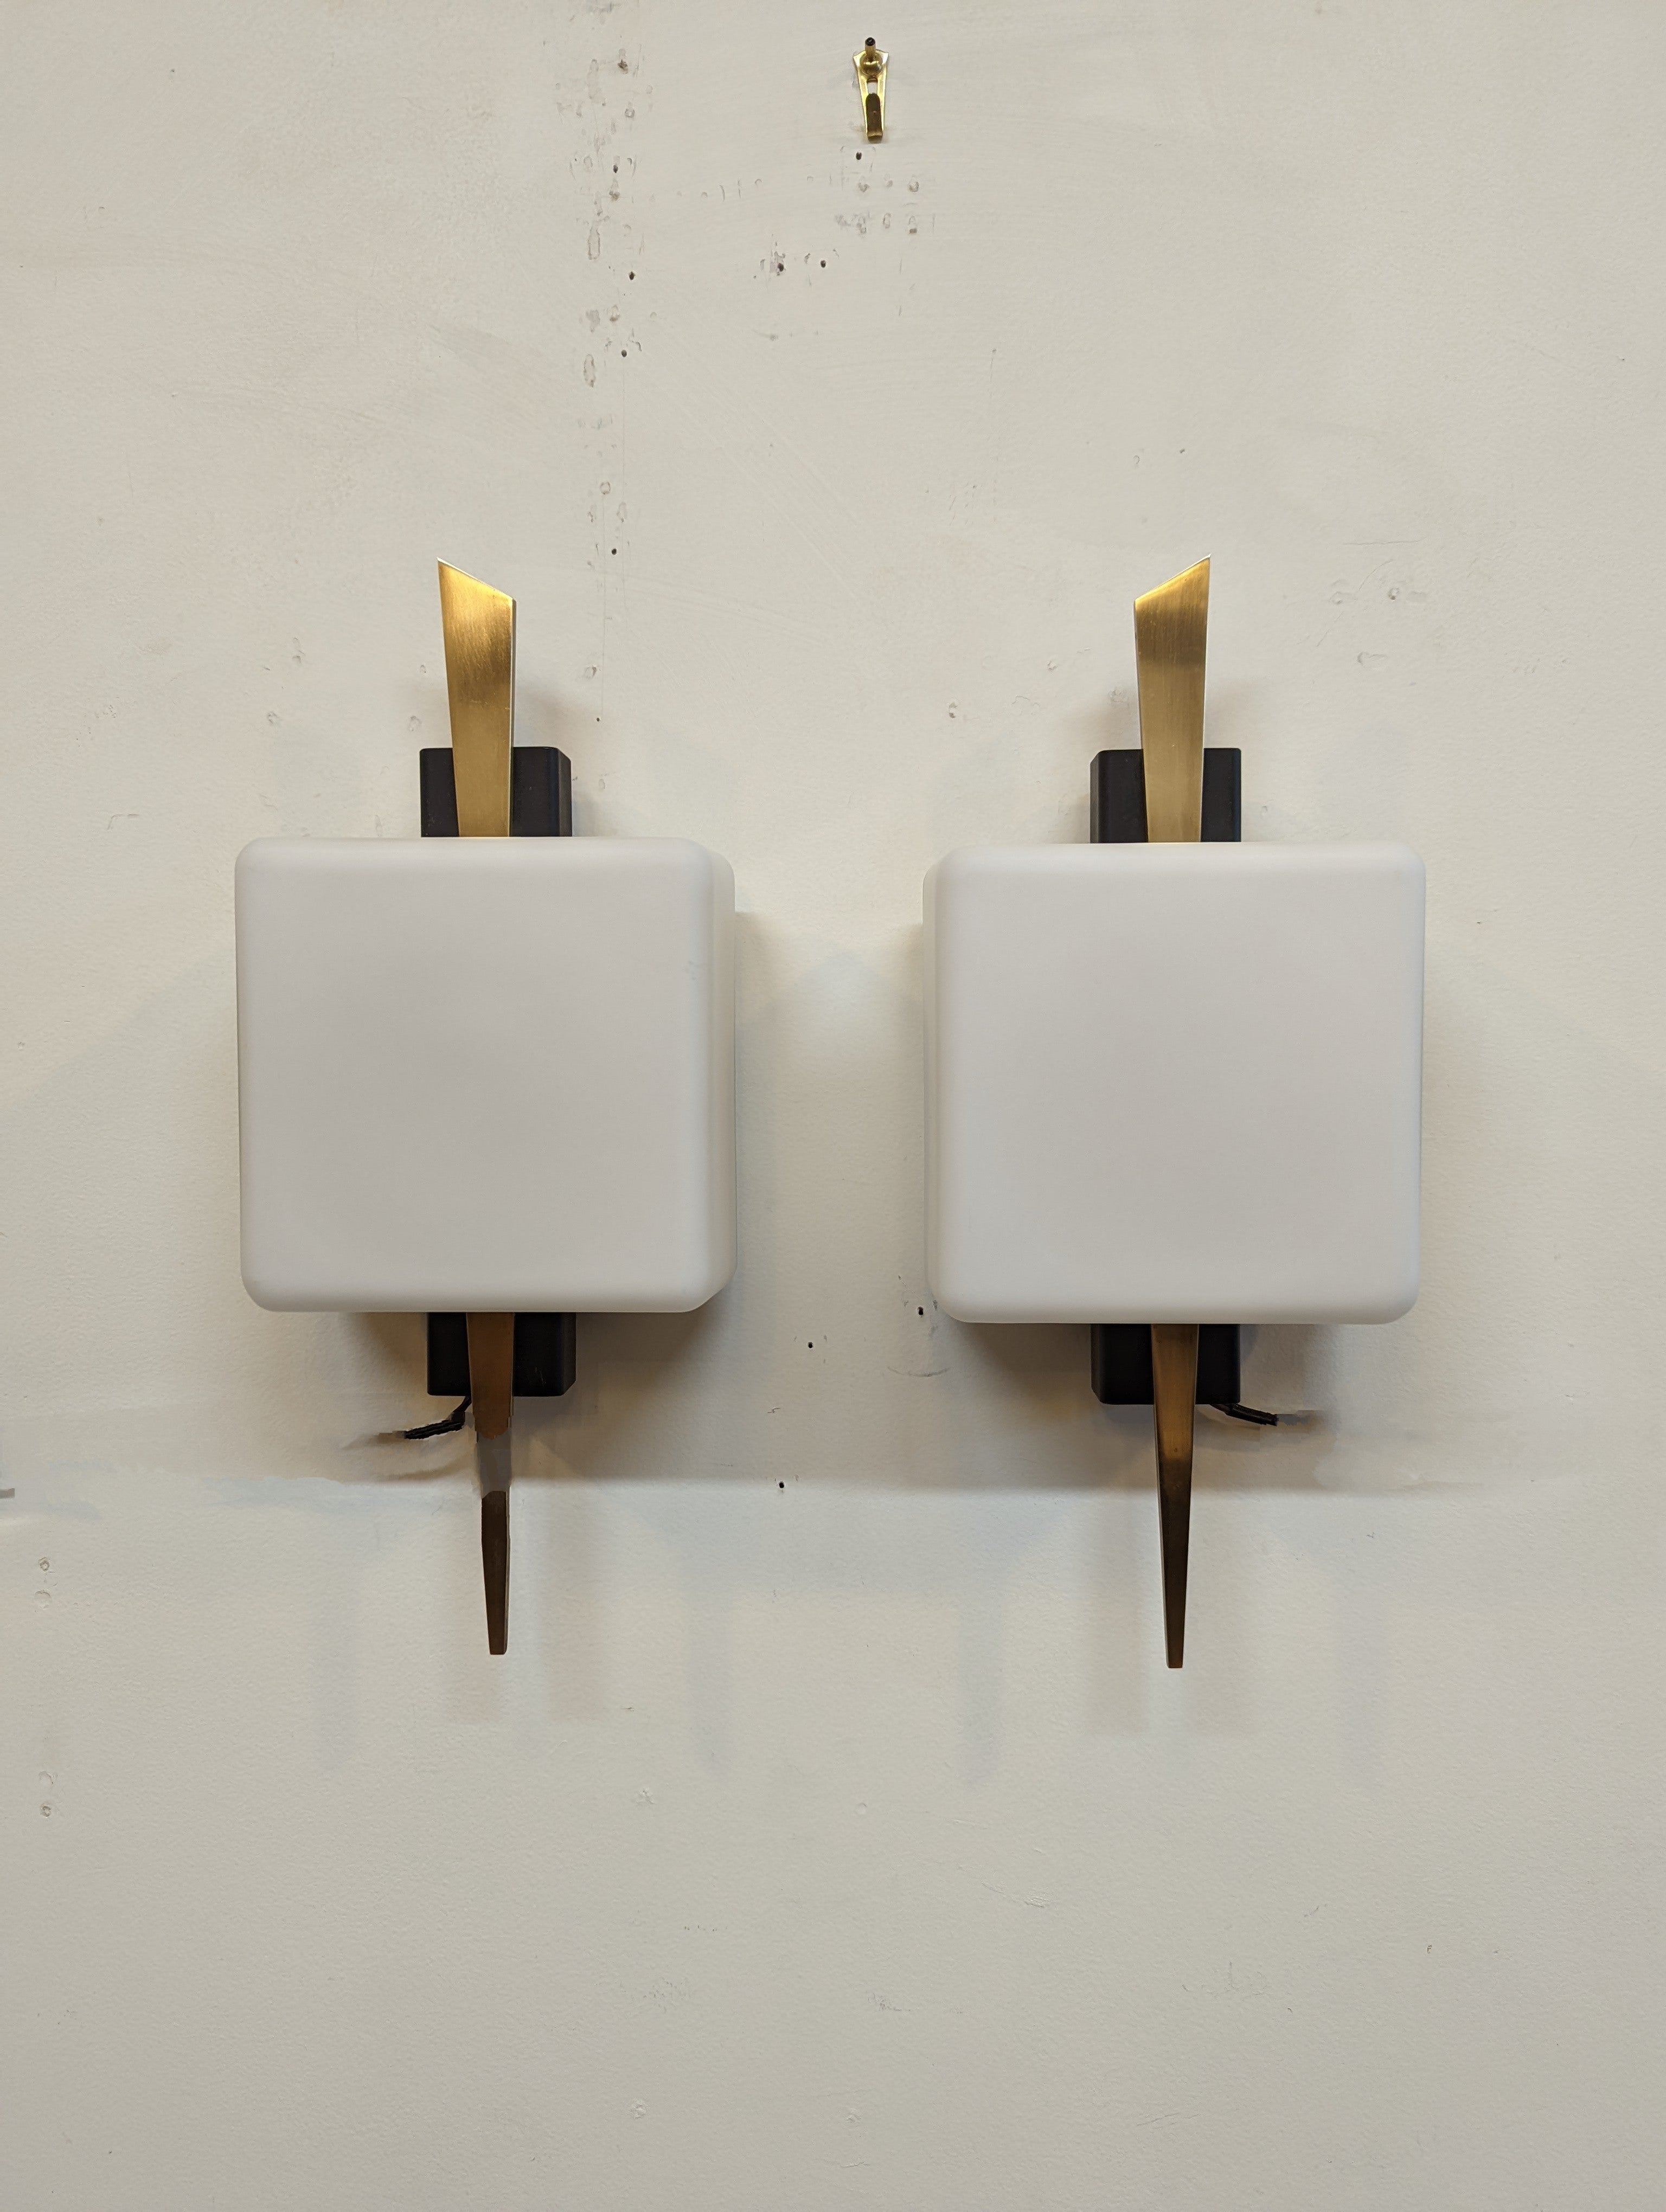 Magnificent pair of Arlus sconces. French Mid Century Modern Sconces by Maison Arlus. Solid brass arrows pointing down through cubed white frosted glass diffusers set an impressive light source for any wall. Luminating a warm light glowing in a